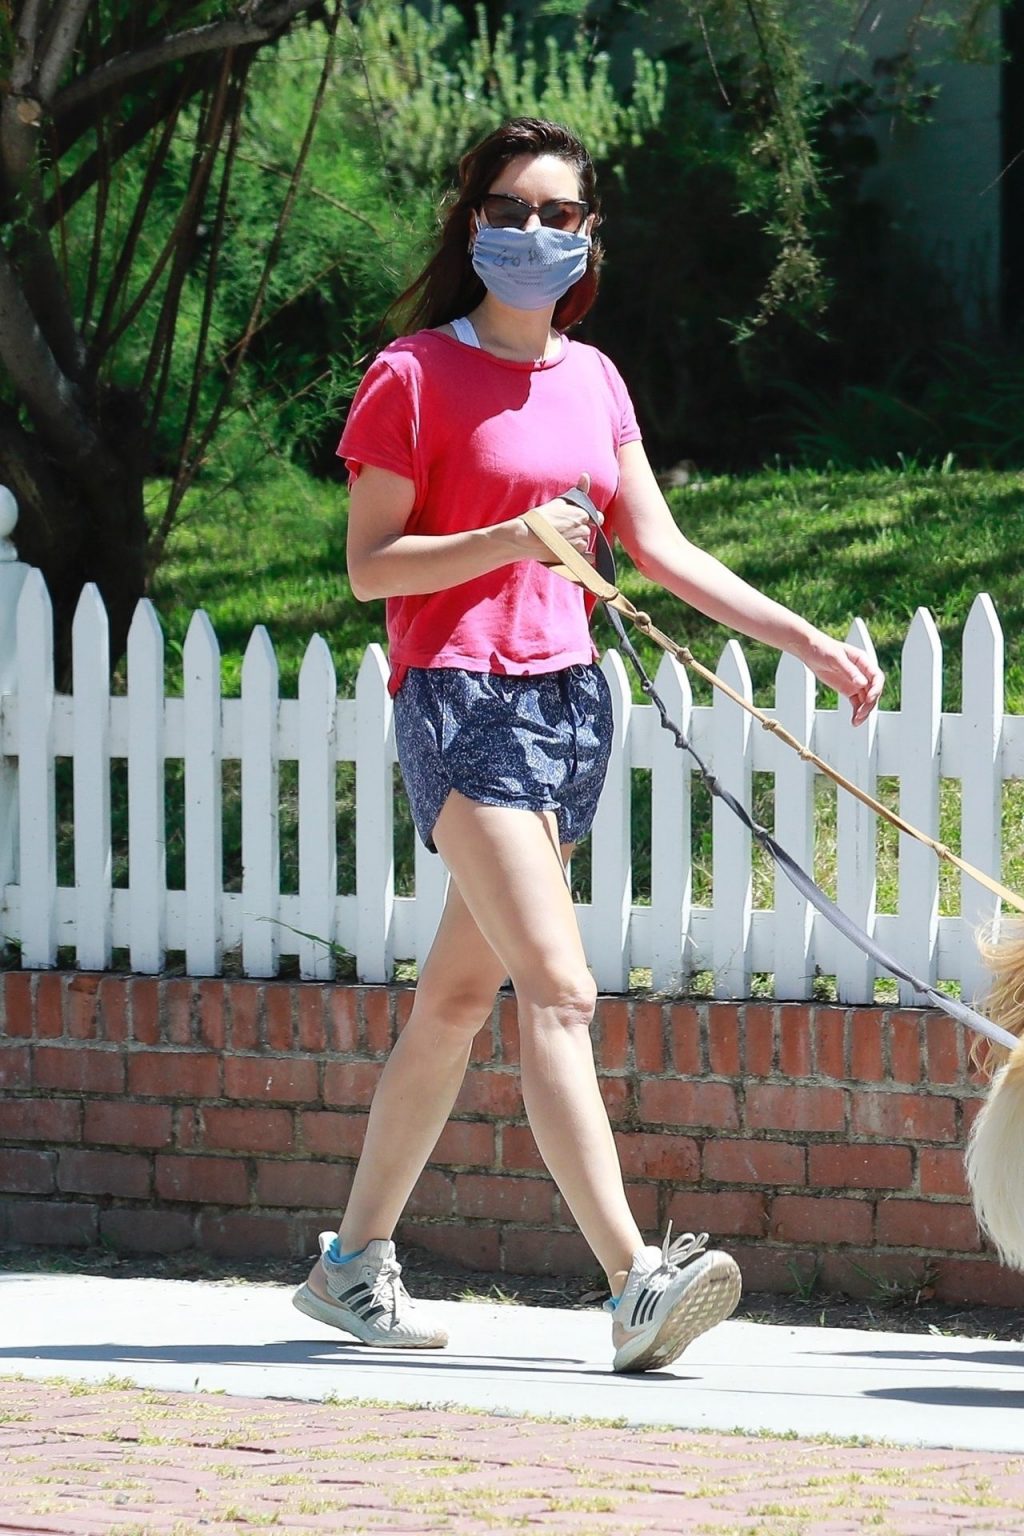 Aubrey Plaza Enjoys Some Fresh Air While Taking Her Dogs For a Walk (19 Photos)